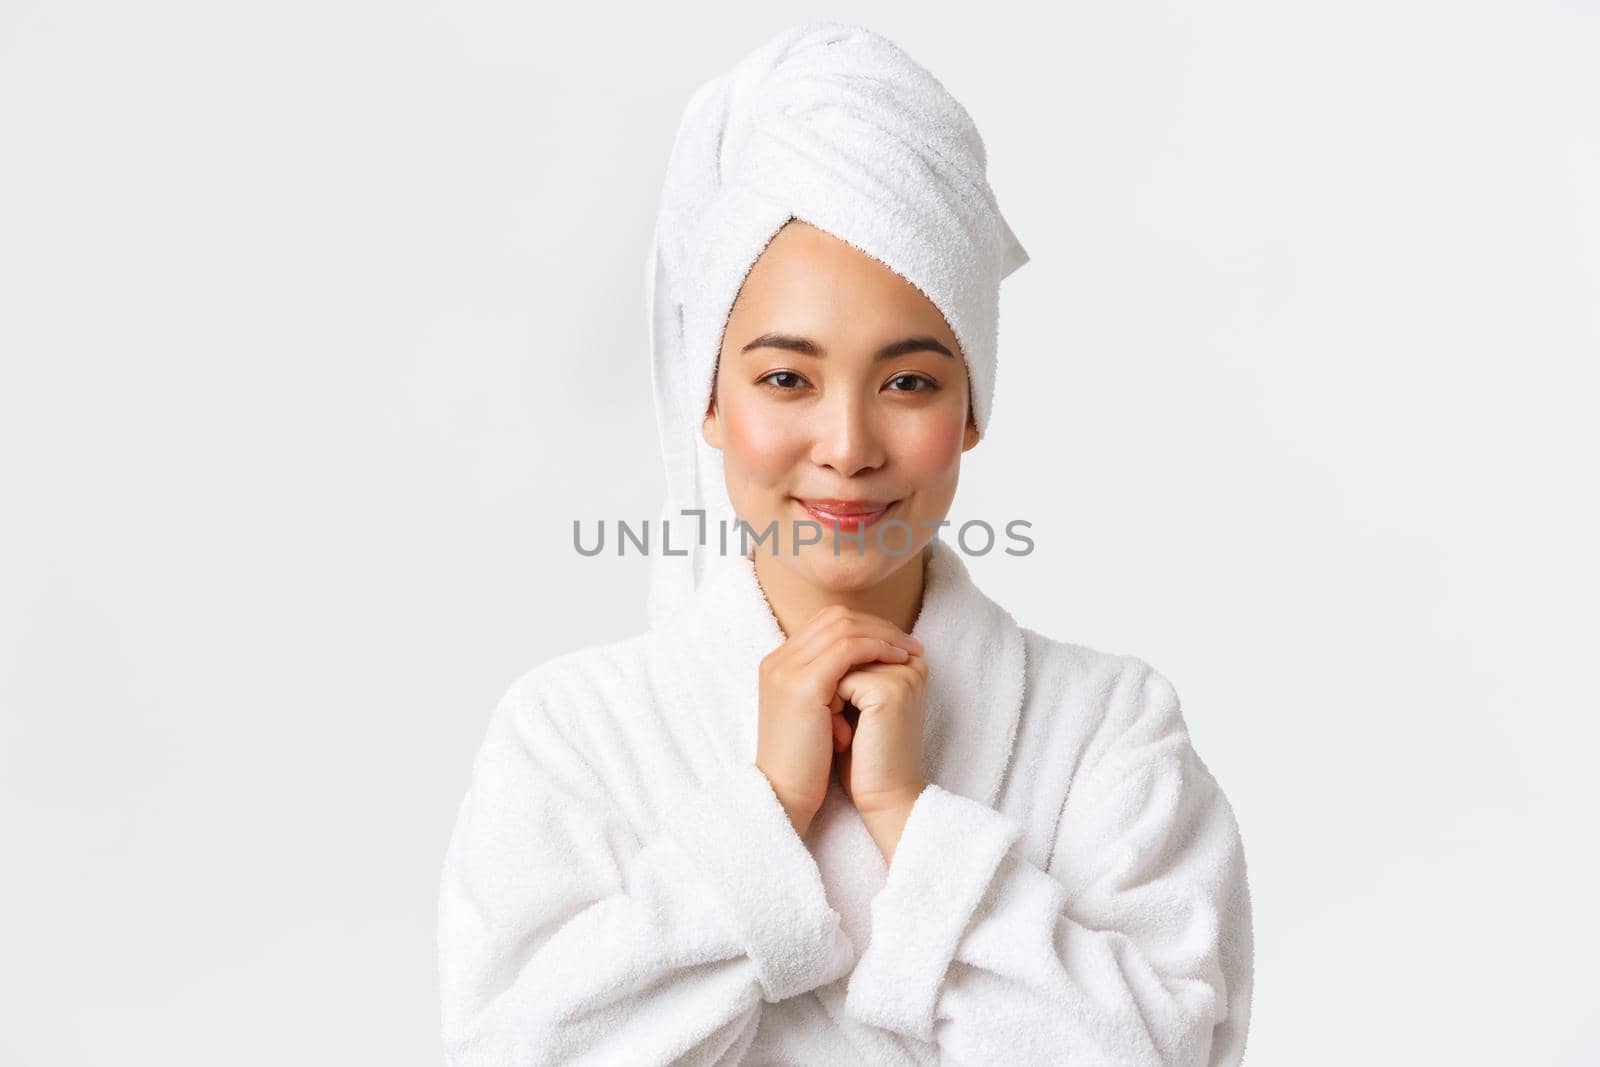 Personal care, women beauty, bath and shower concept. Tender attractive asian girl in bathrobe and towel looking with admiration or delight, smiling cute, standing white background hopeful.